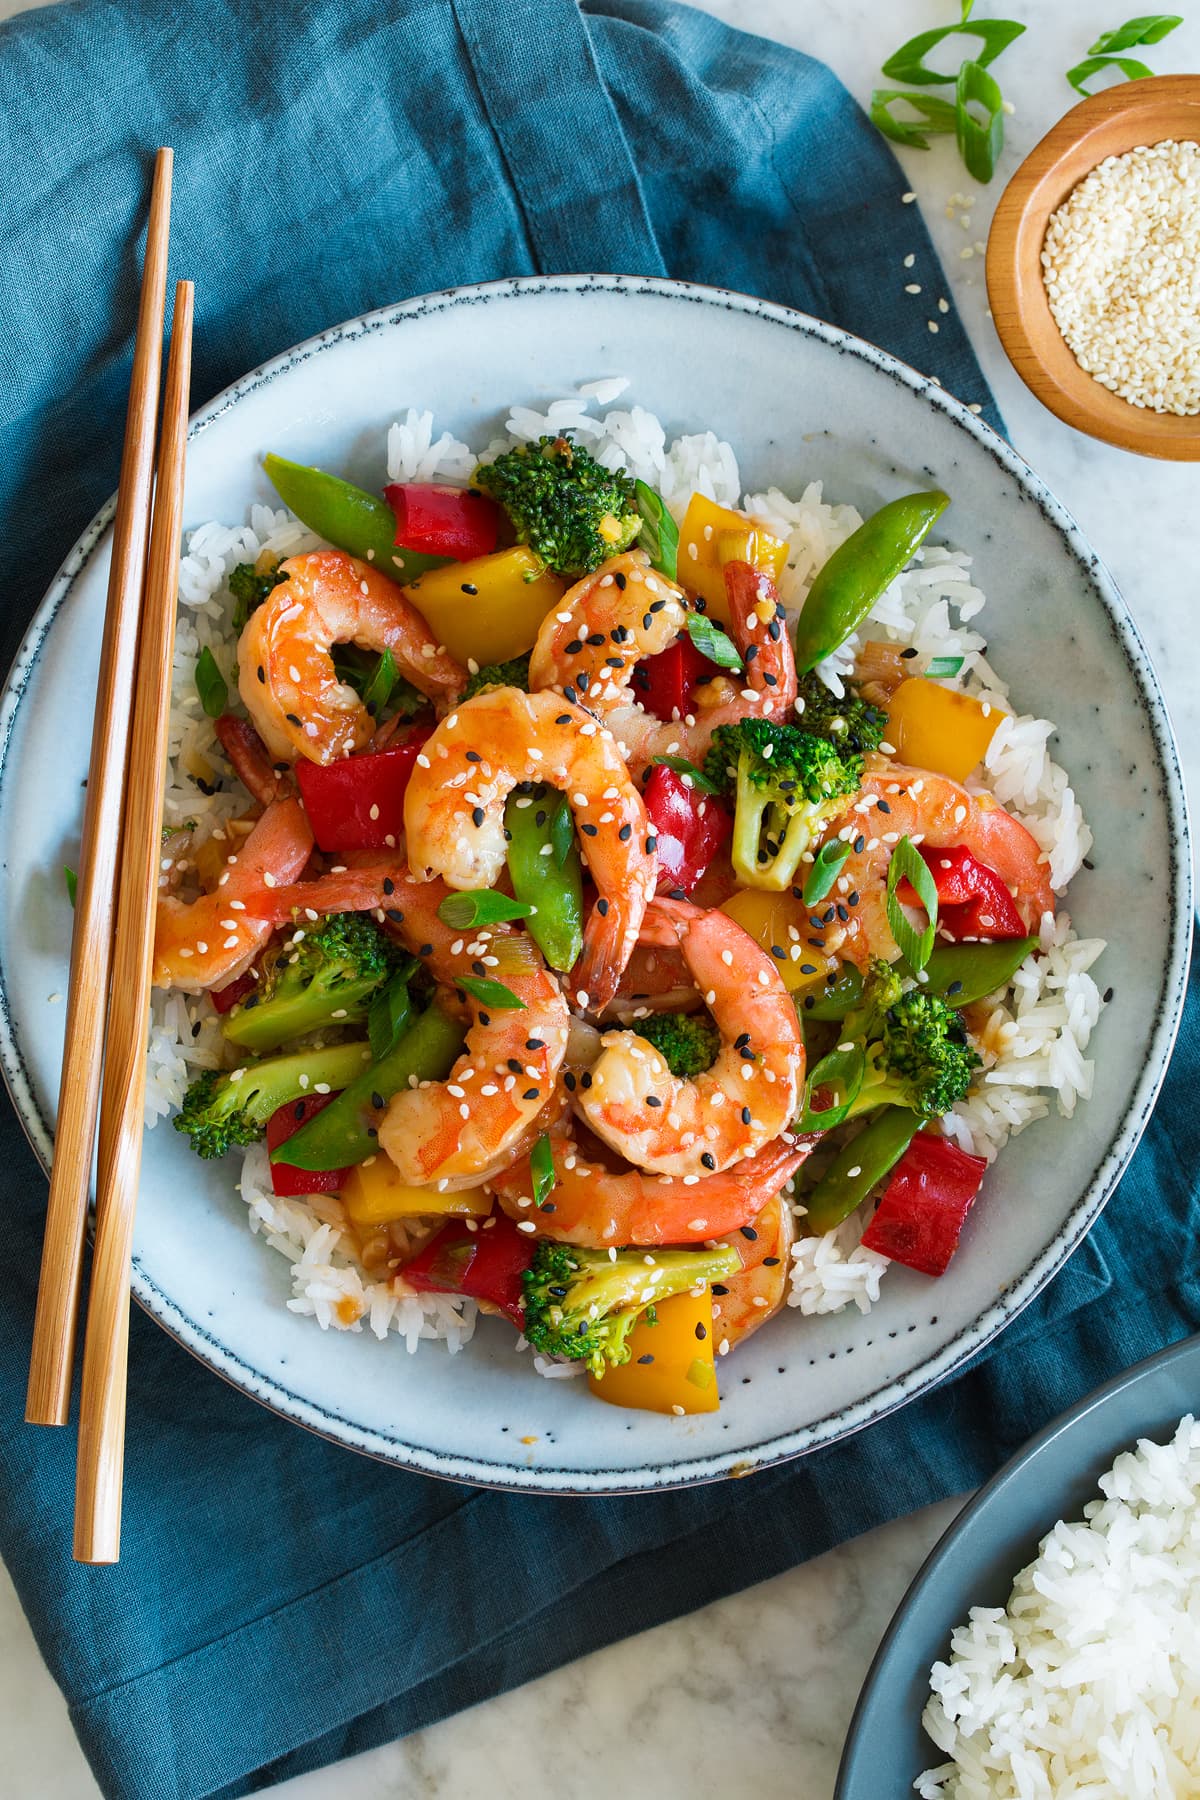 Shrimp stir fry shown with rice in a blue serving bowl.